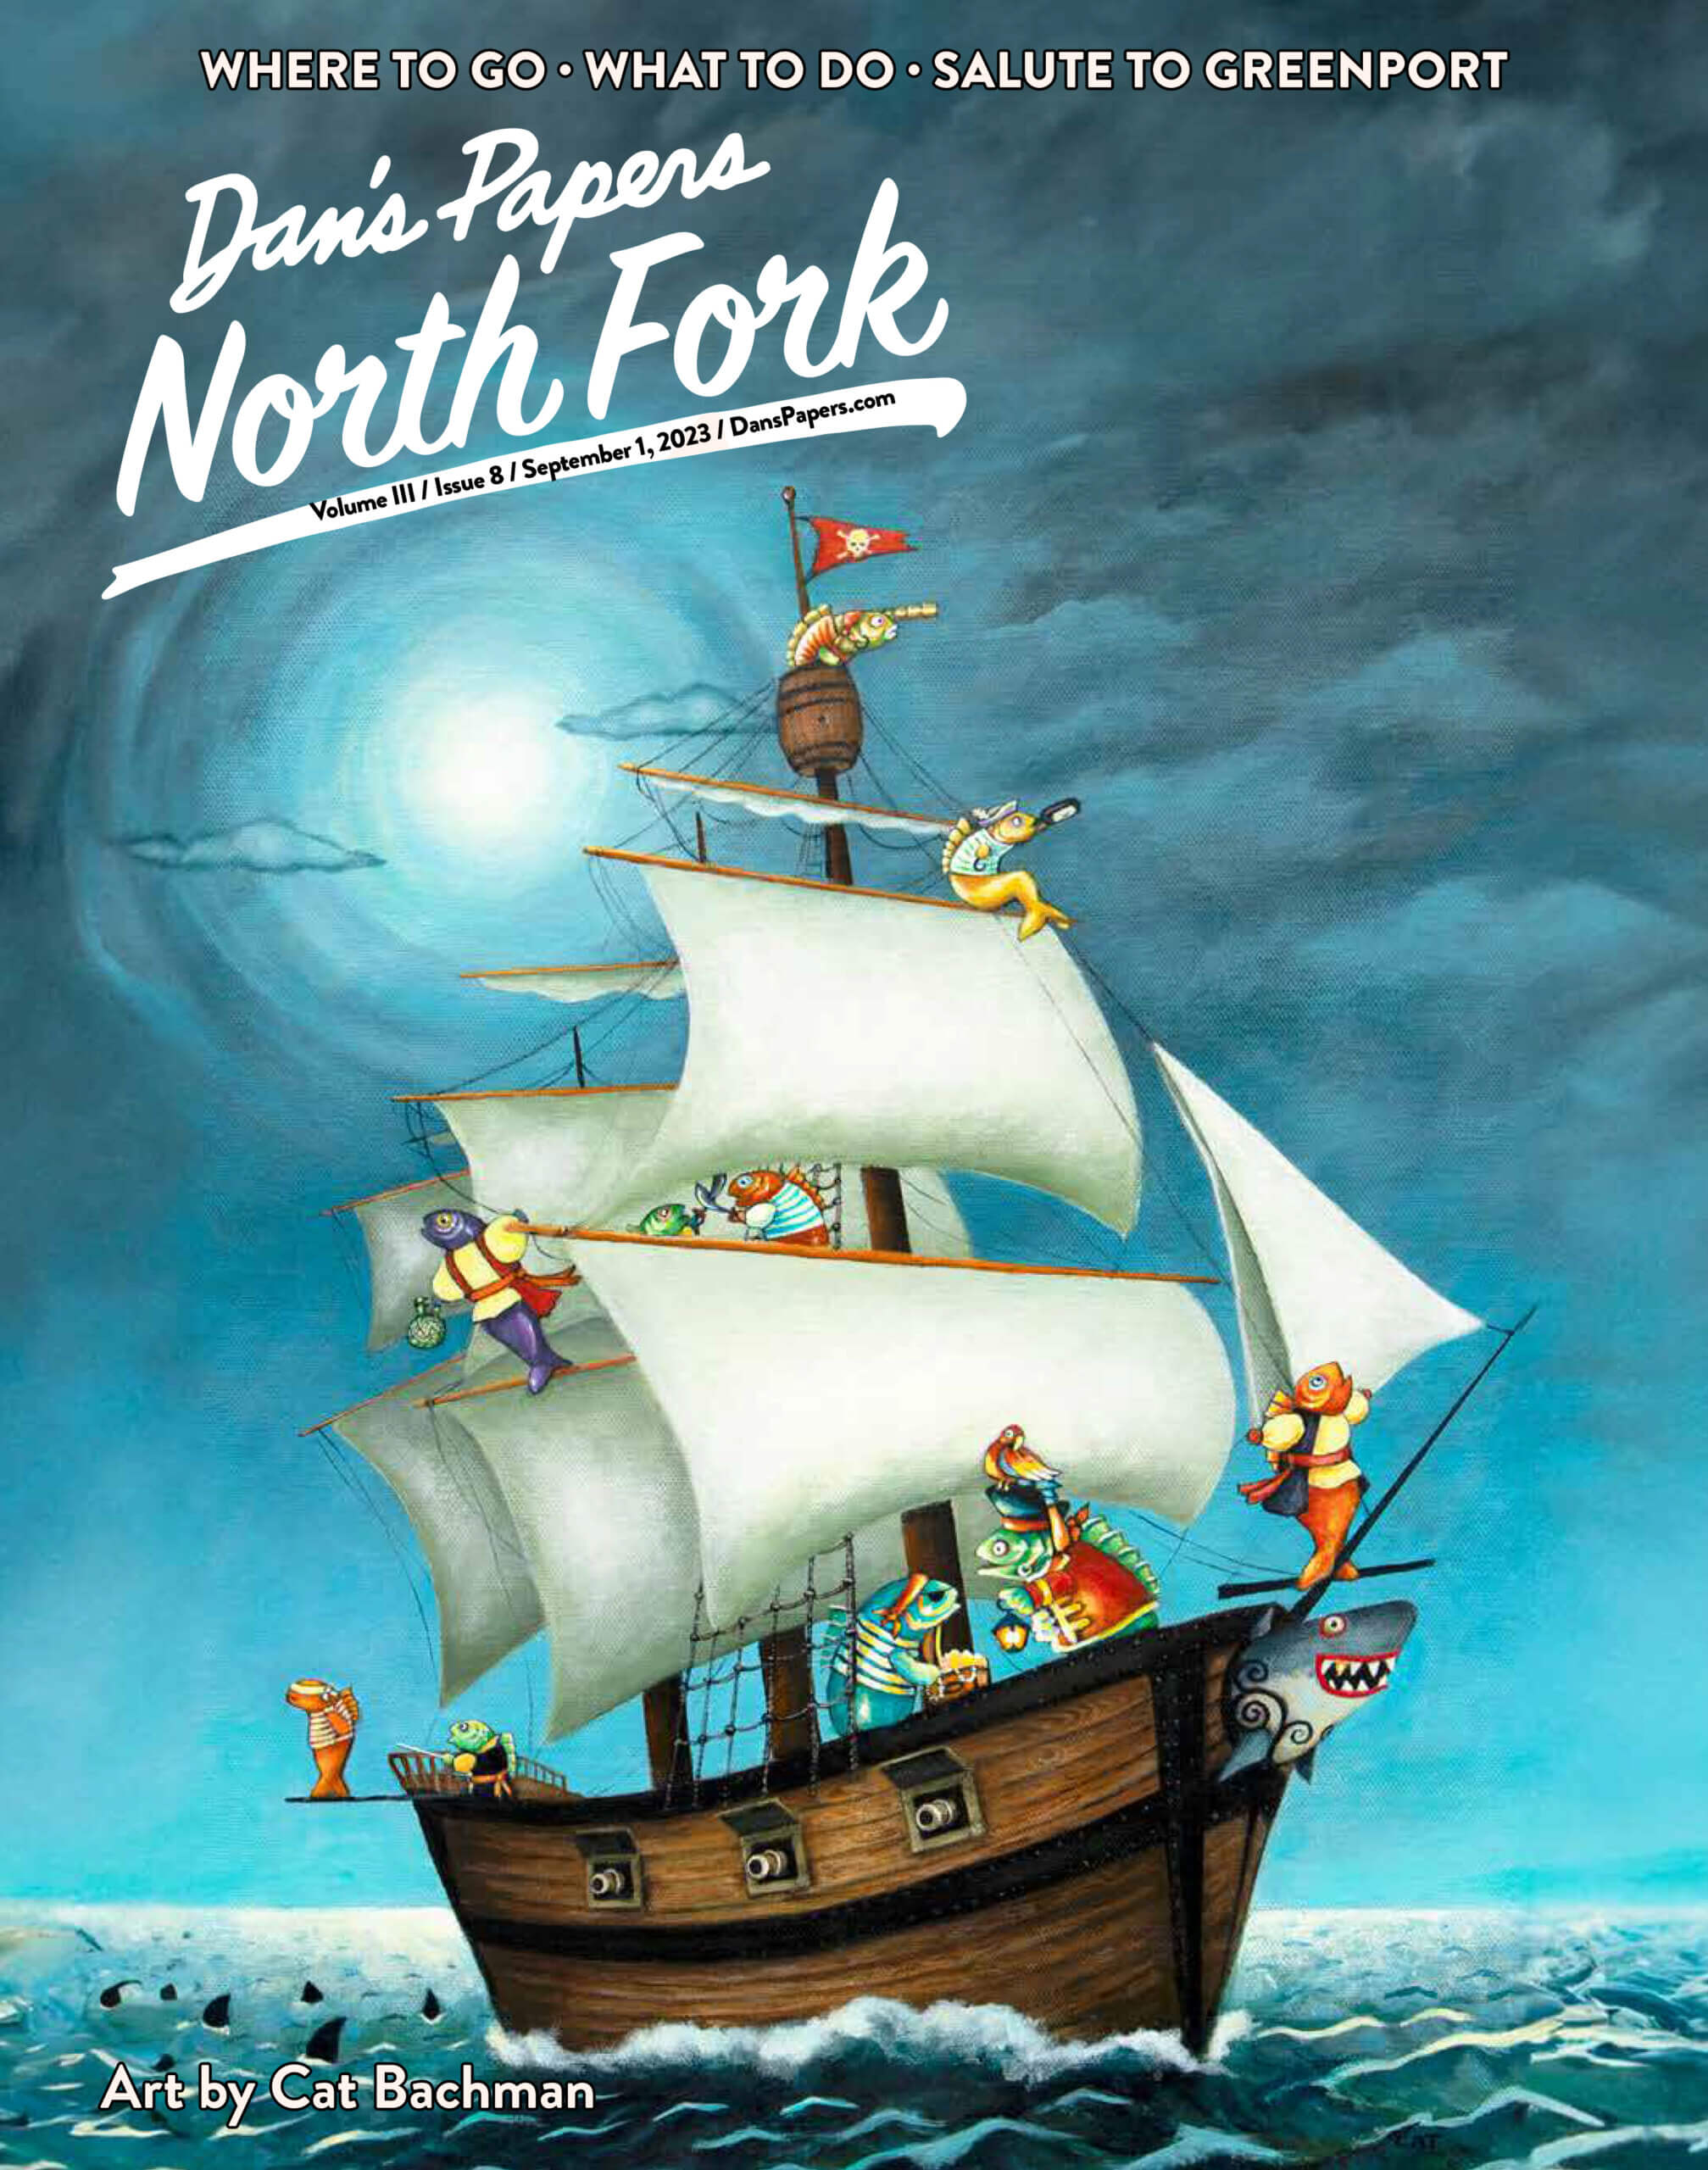 September 1, 2023 Dan's Papers North Fork cover art by Cat Bachman